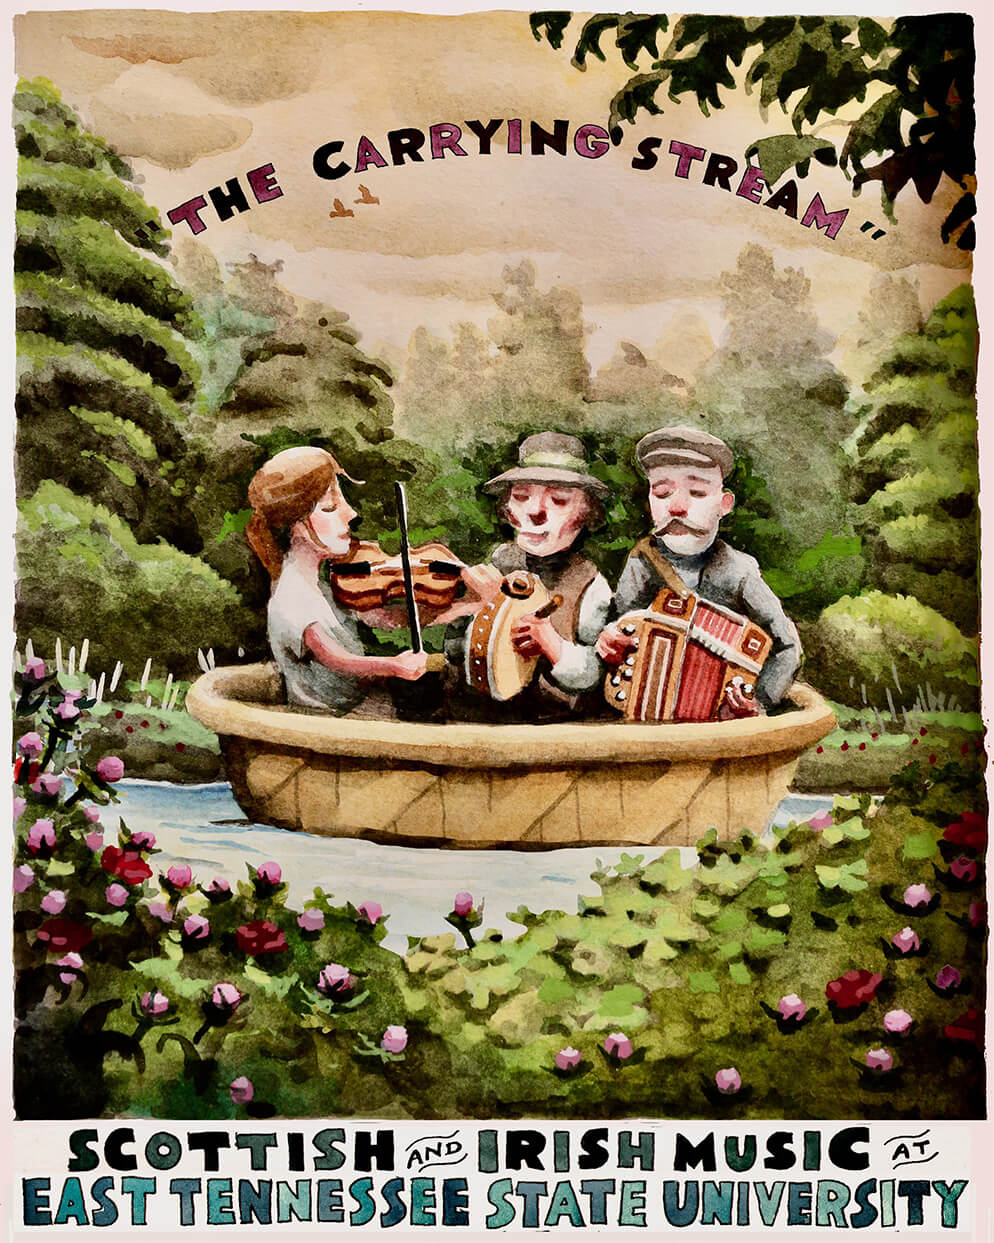 The Carrying Stream, Sottish and Irish Music at East Tennessee State University